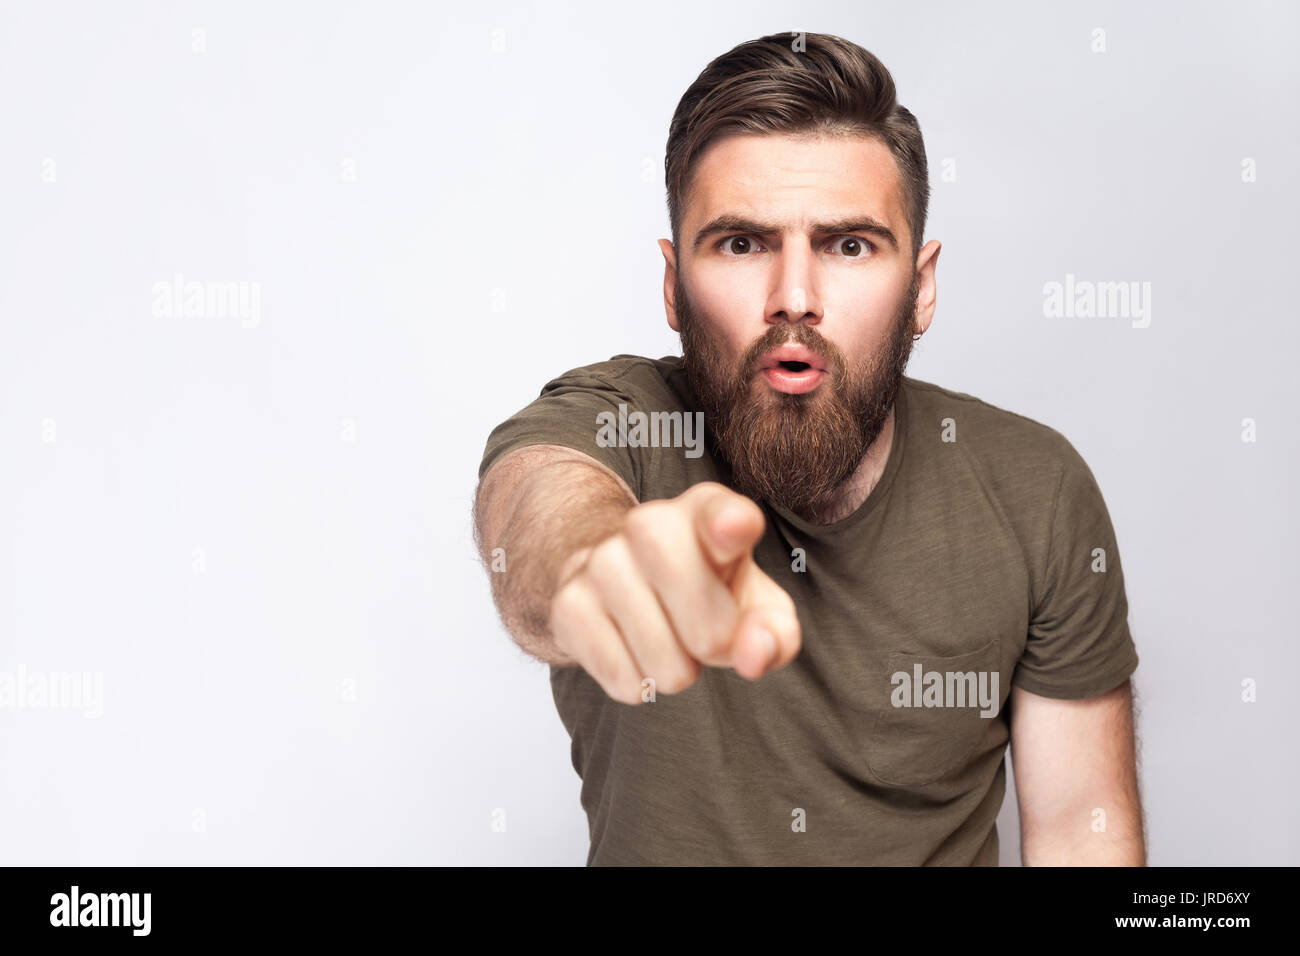 Hey You! Portrait of surprised excited bearded man with dark green t shirt against light gray background. studio shot. Stock Photo